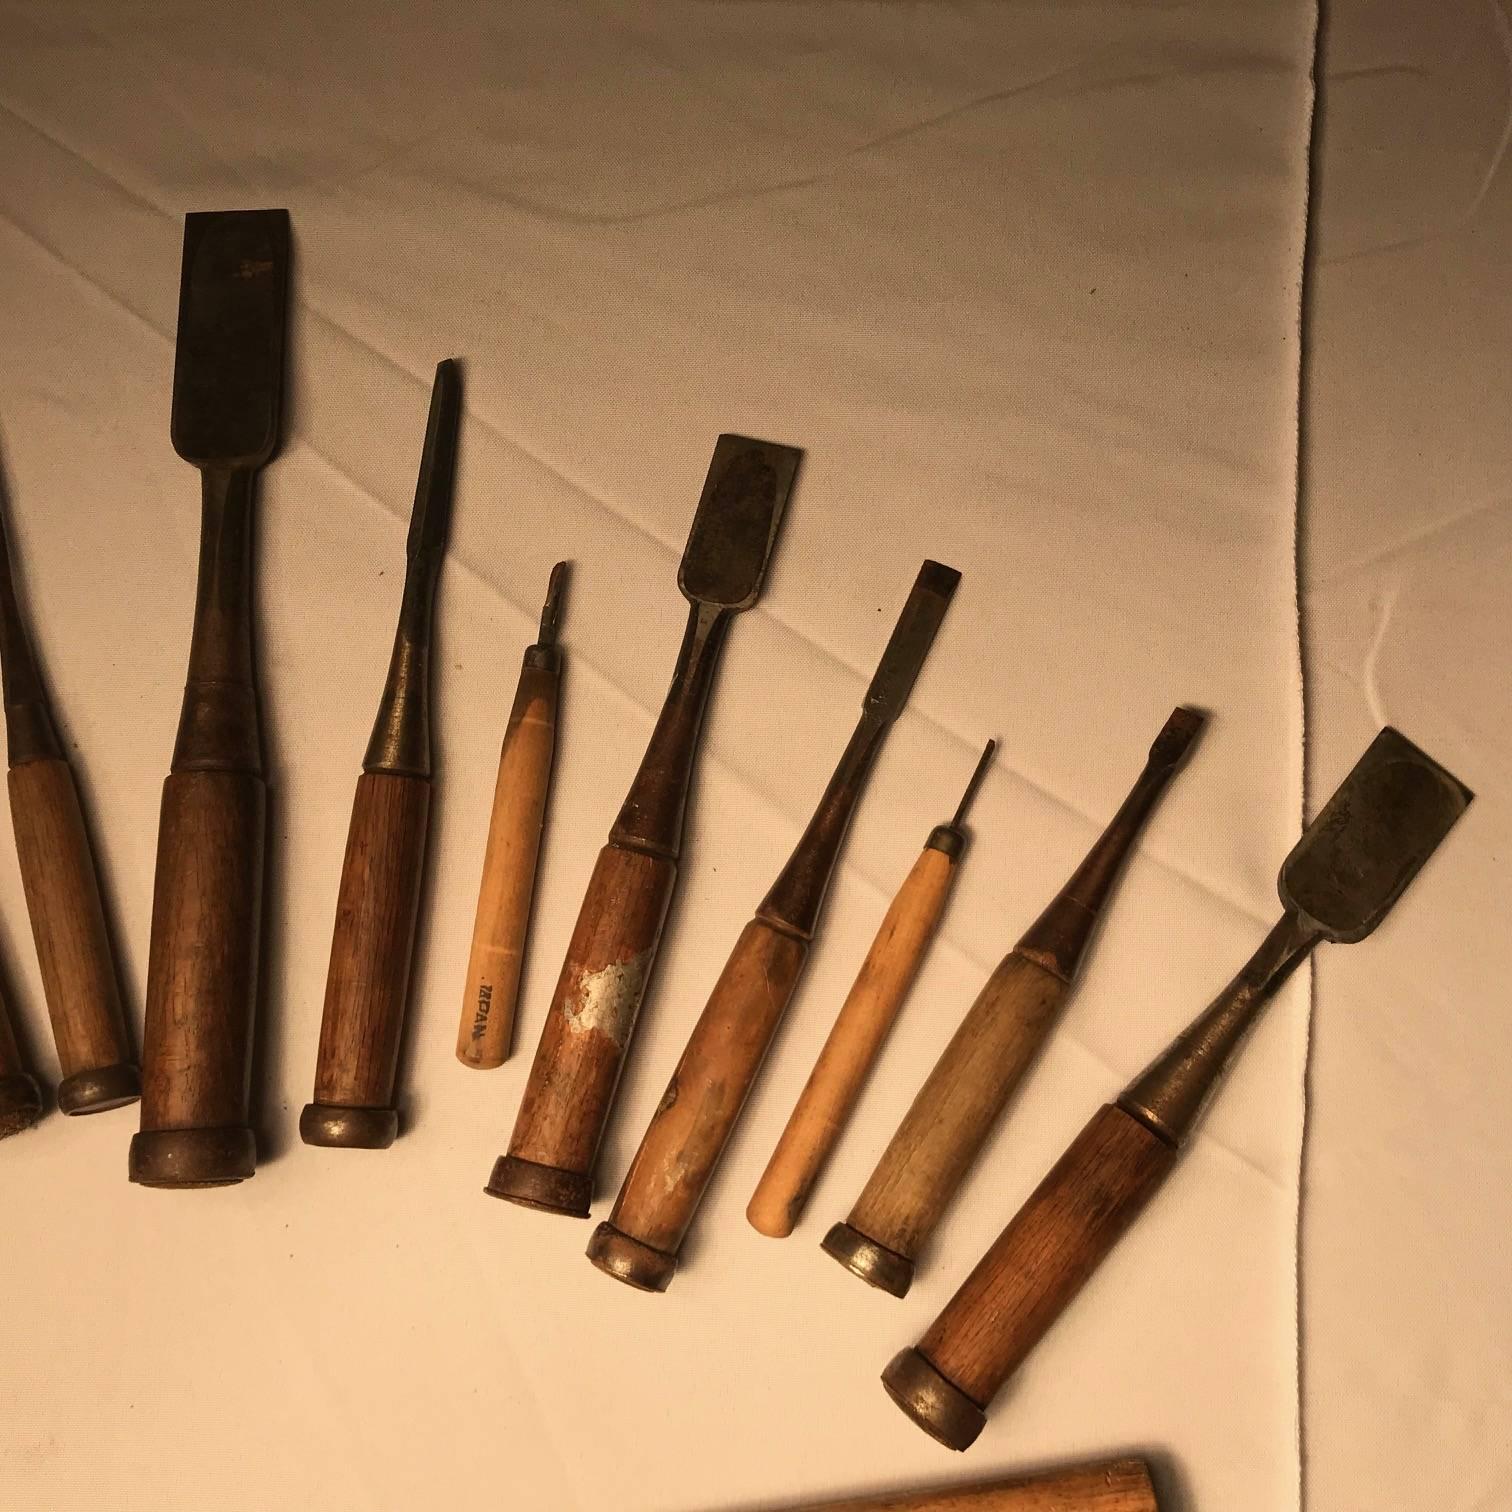 20th Century Japanese Artisan's Cache Box of 15 Professional Nomi Carpenter's Carving Tools